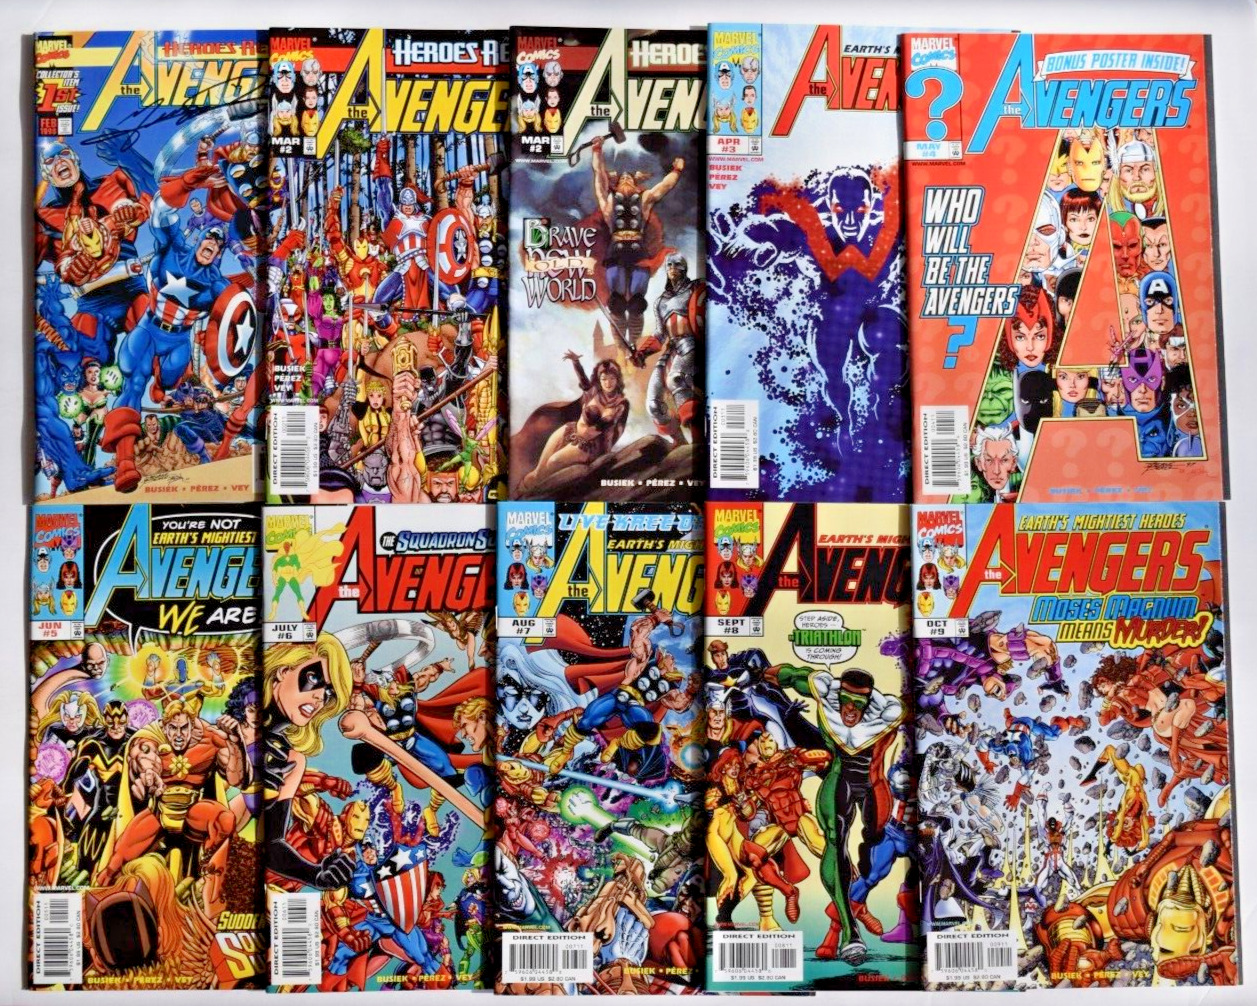 AVENGERS (1998) 22 ISSUE COMIC RUN #1-21 & #2 VARIANT #1 SIGNED GEORGE PEREZ